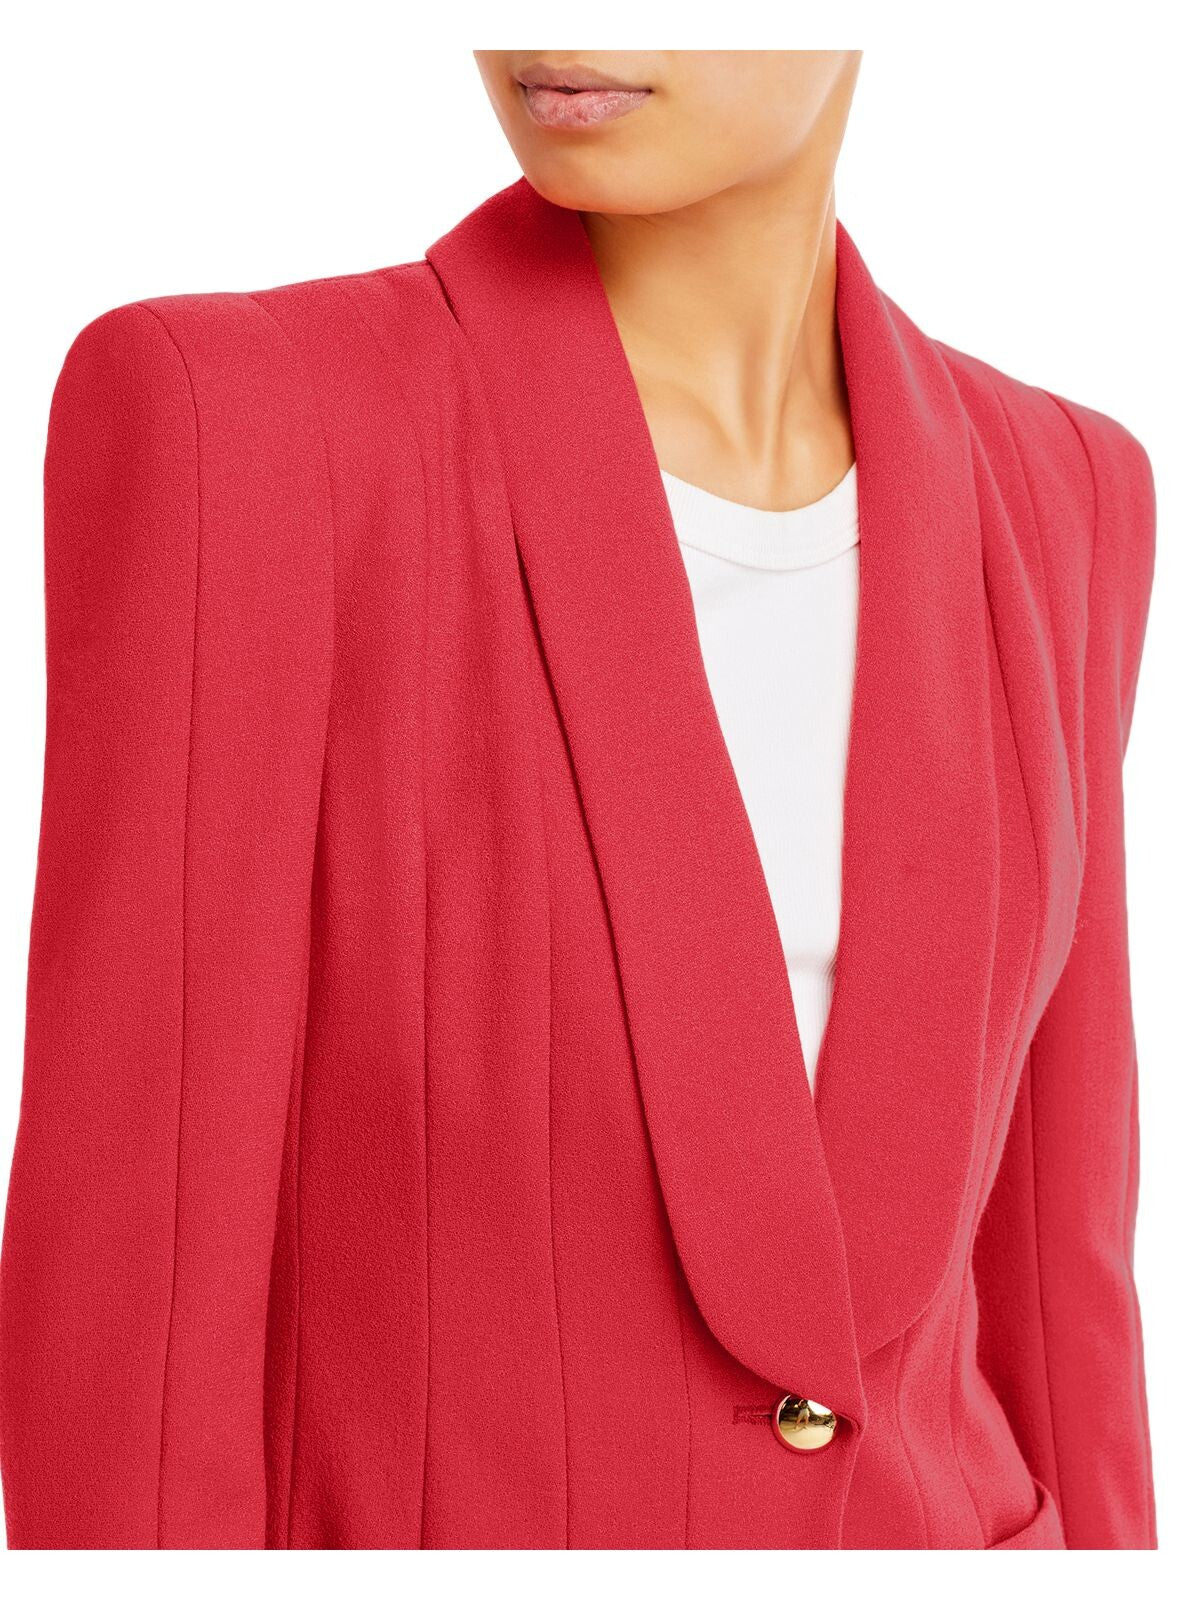 SERGIO HUDSON Womens Red Pocketed Slitted Seamed Lined Shoulder Pads Wear To Work Blazer Jacket 14